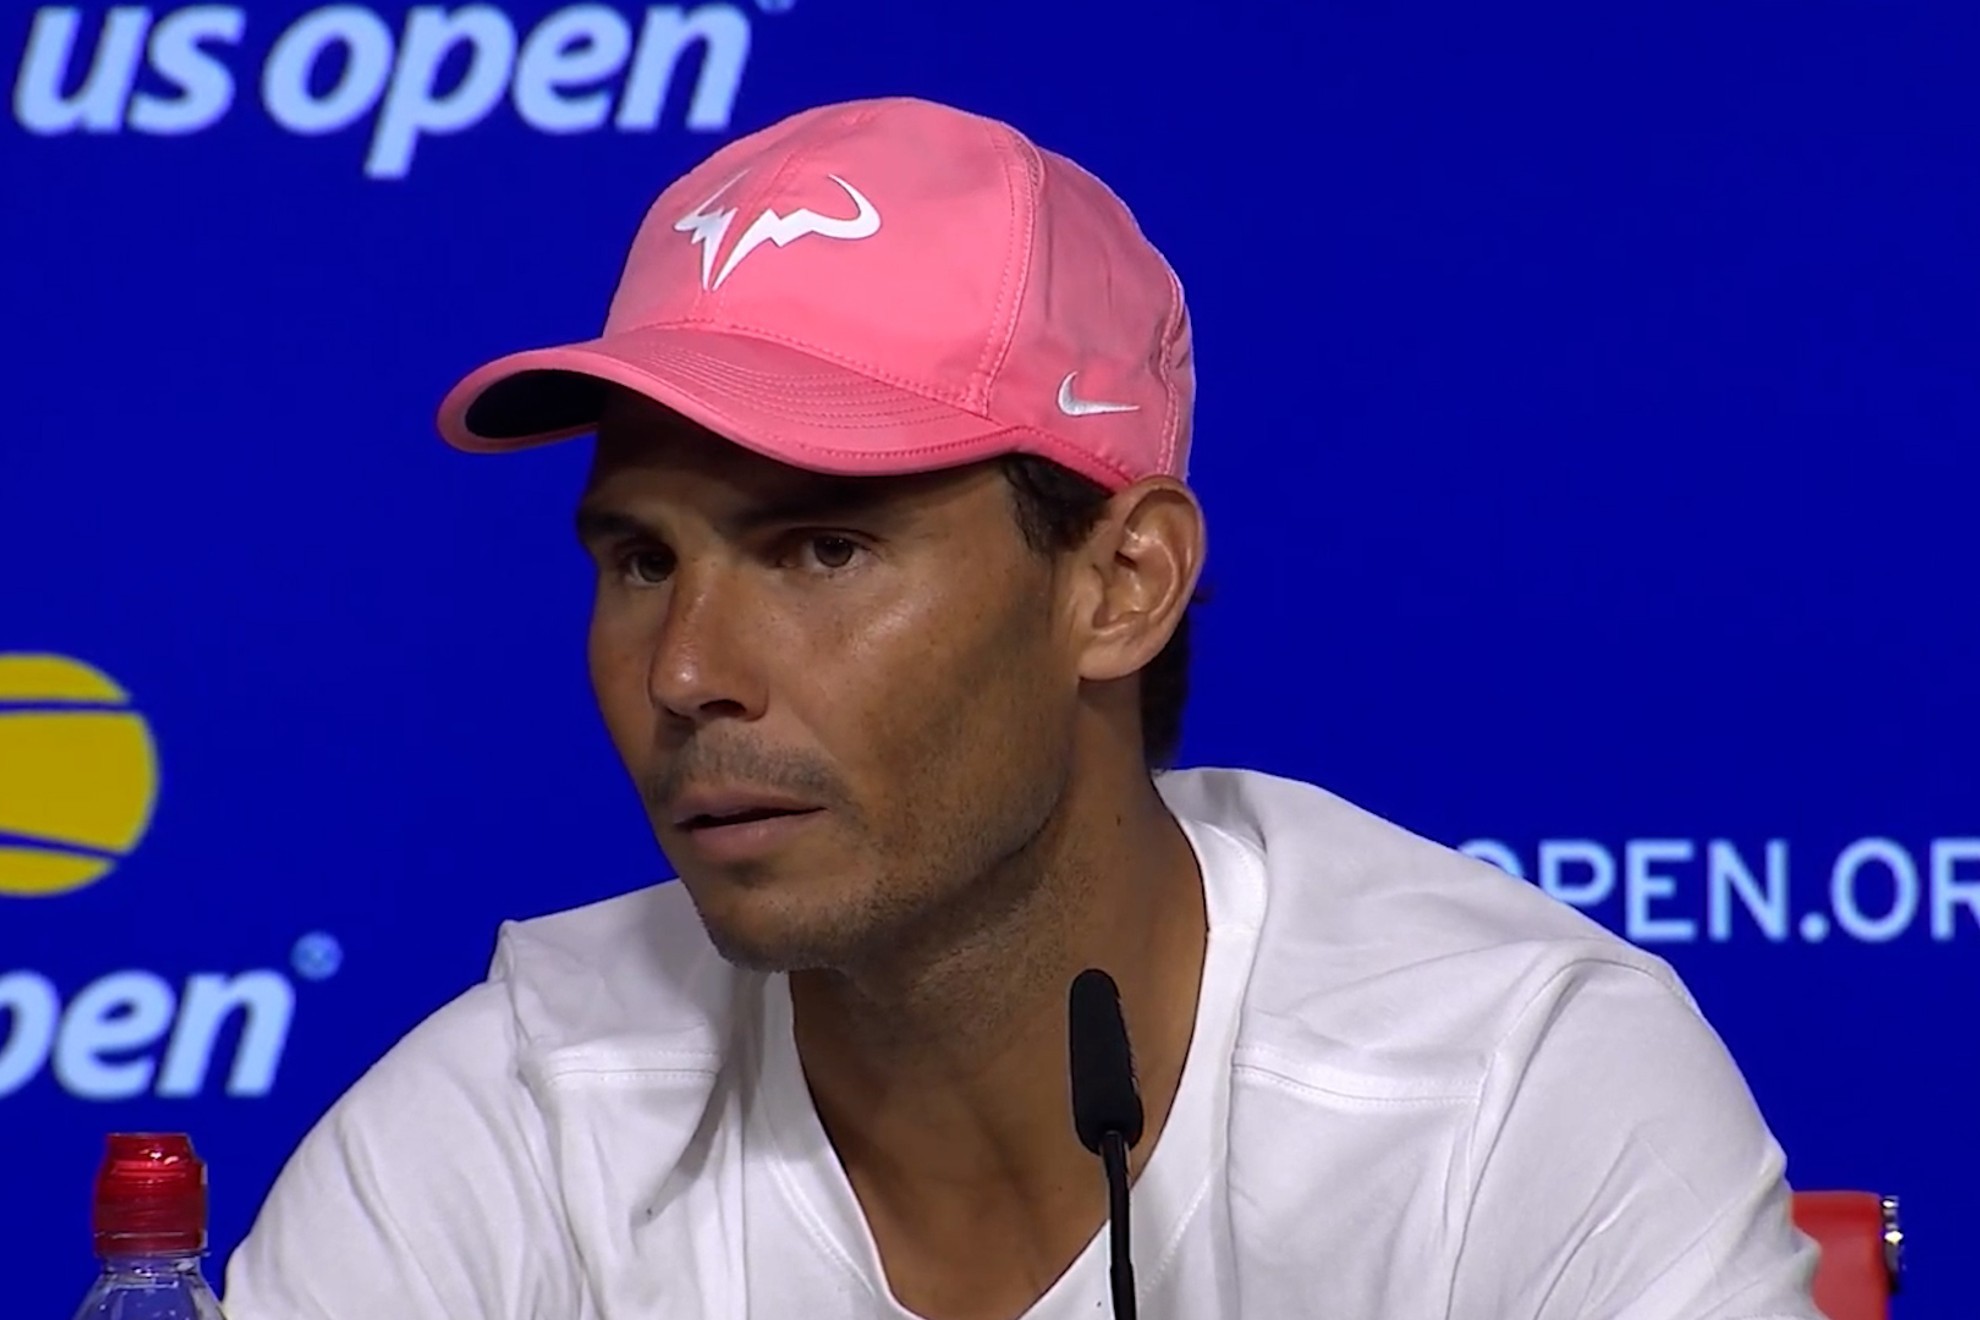 Nadal's anger with a journalist who accuses him of cheating